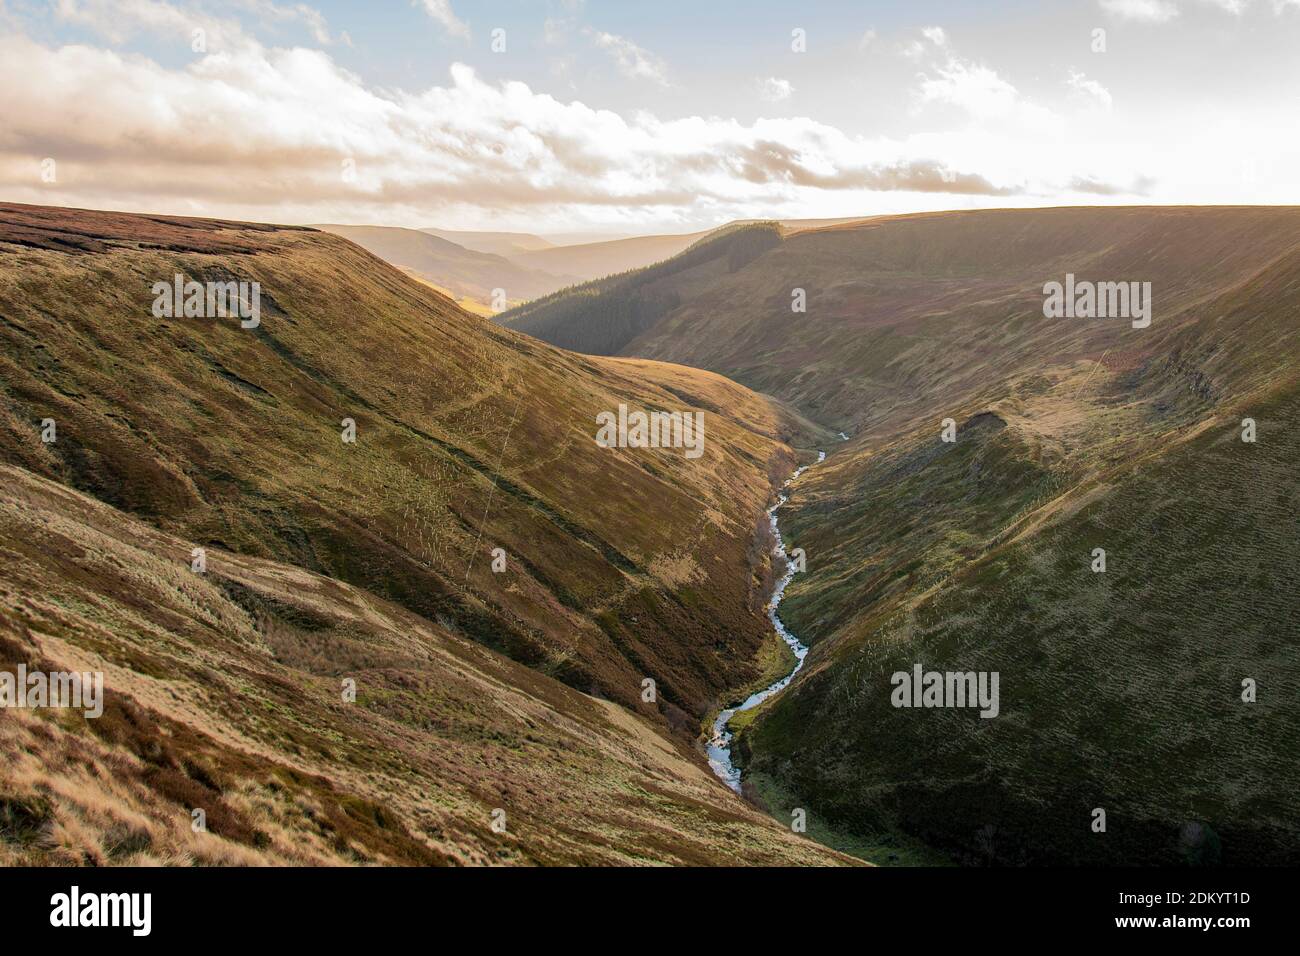 The river cutting through the Alport Valley Stock Photo